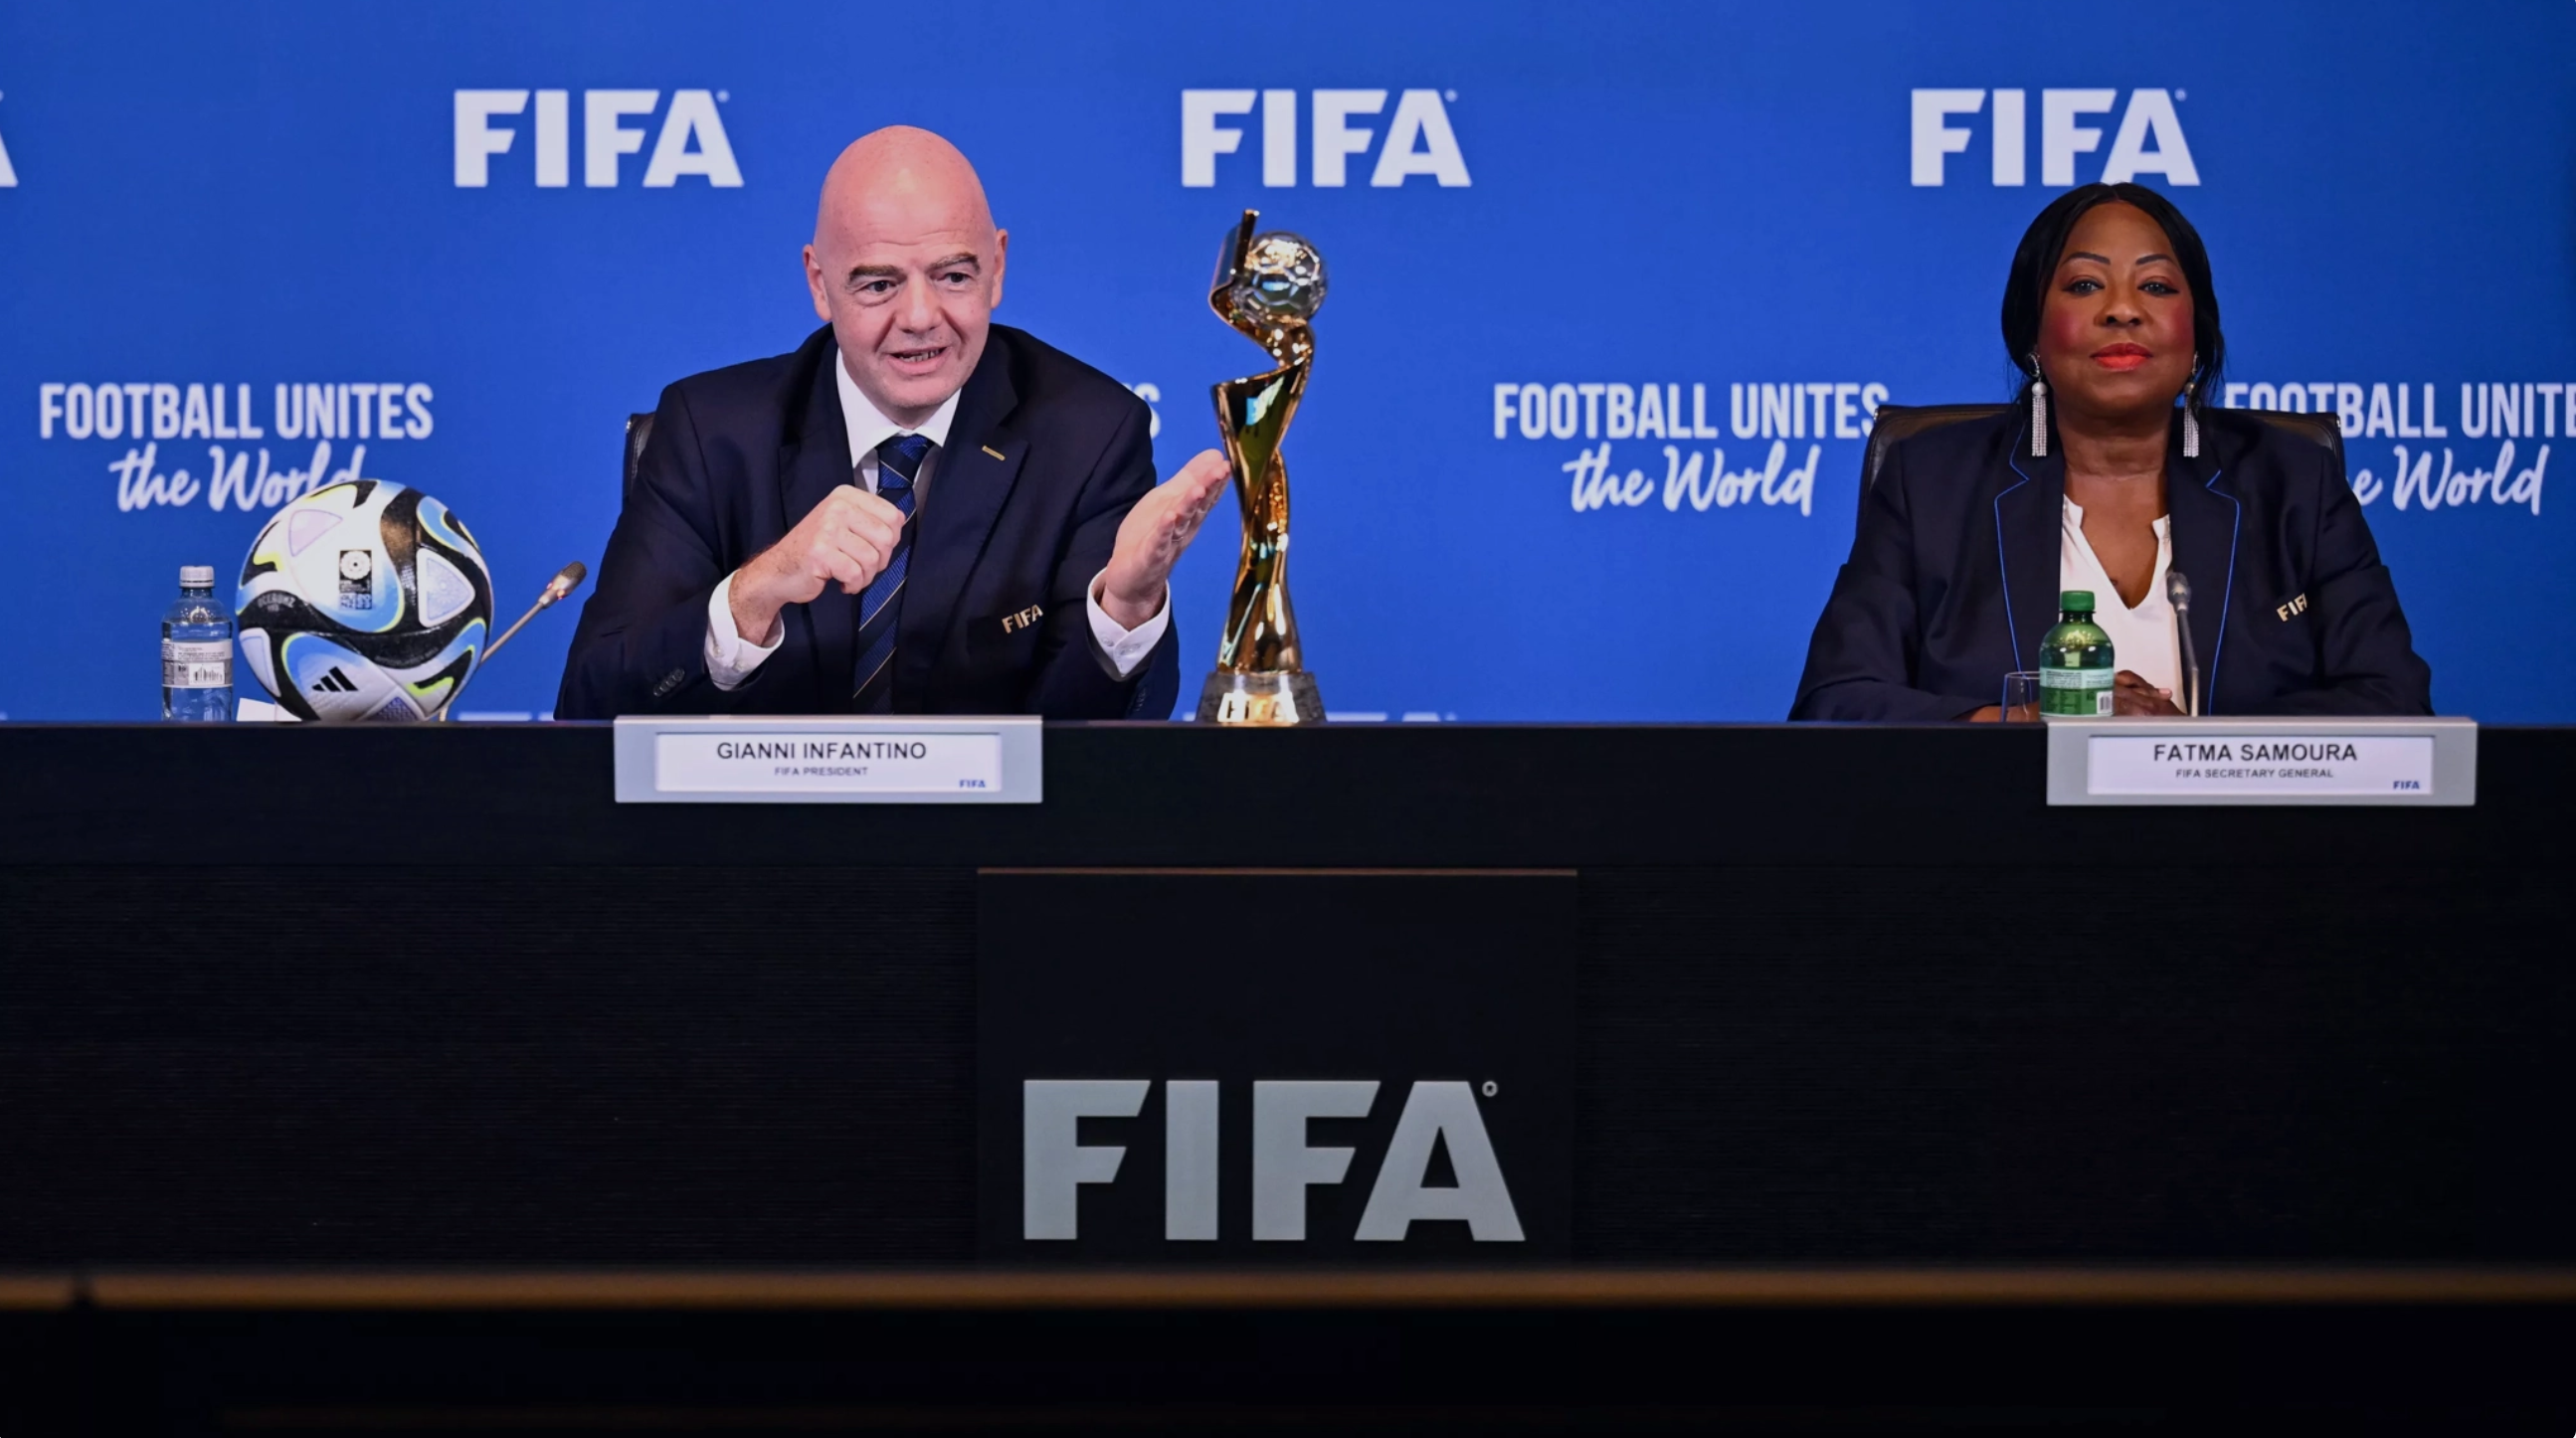 United States to host the first 32-team FIFA Club World Cup in 2025